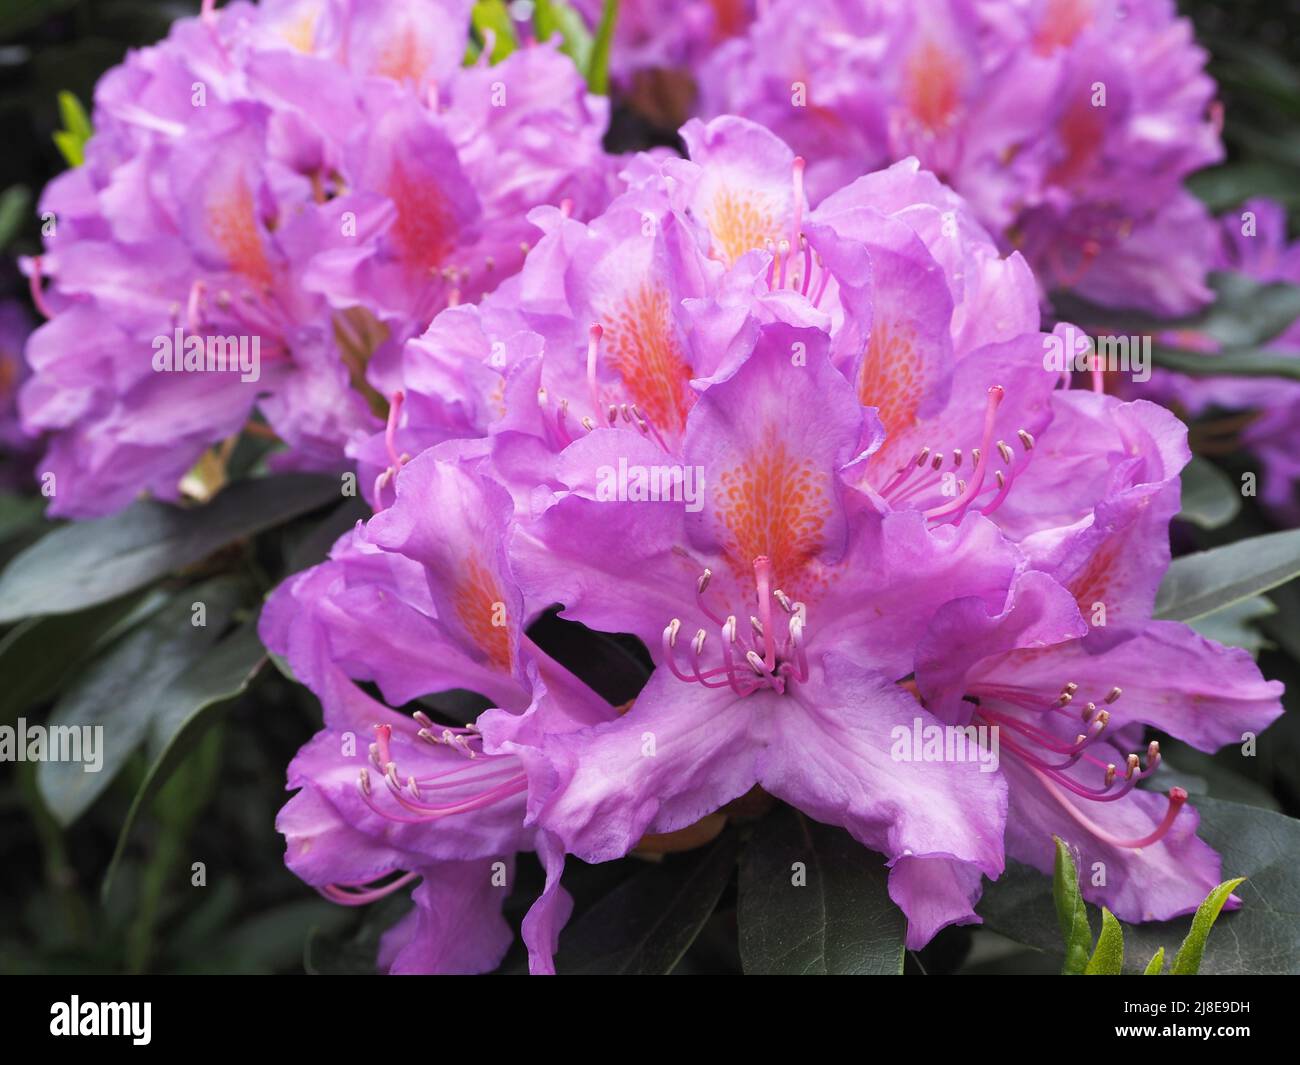 Rhododendrons at the Valley Gardens, Virginia Water, Berkshire England UK Stock Photo